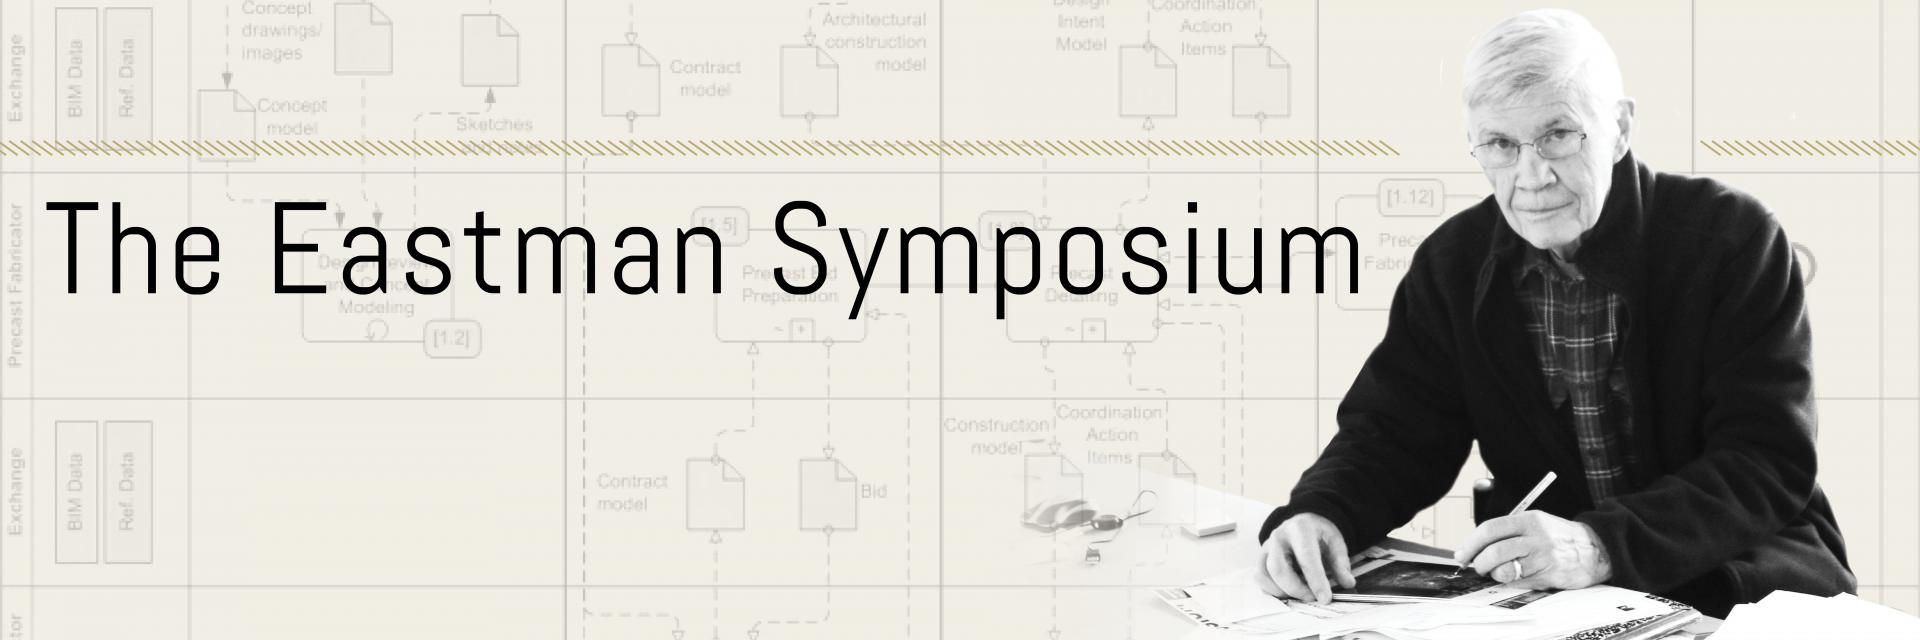 image of Prof. Eastman overlaid with the title of symposium and shown one of his diagram.